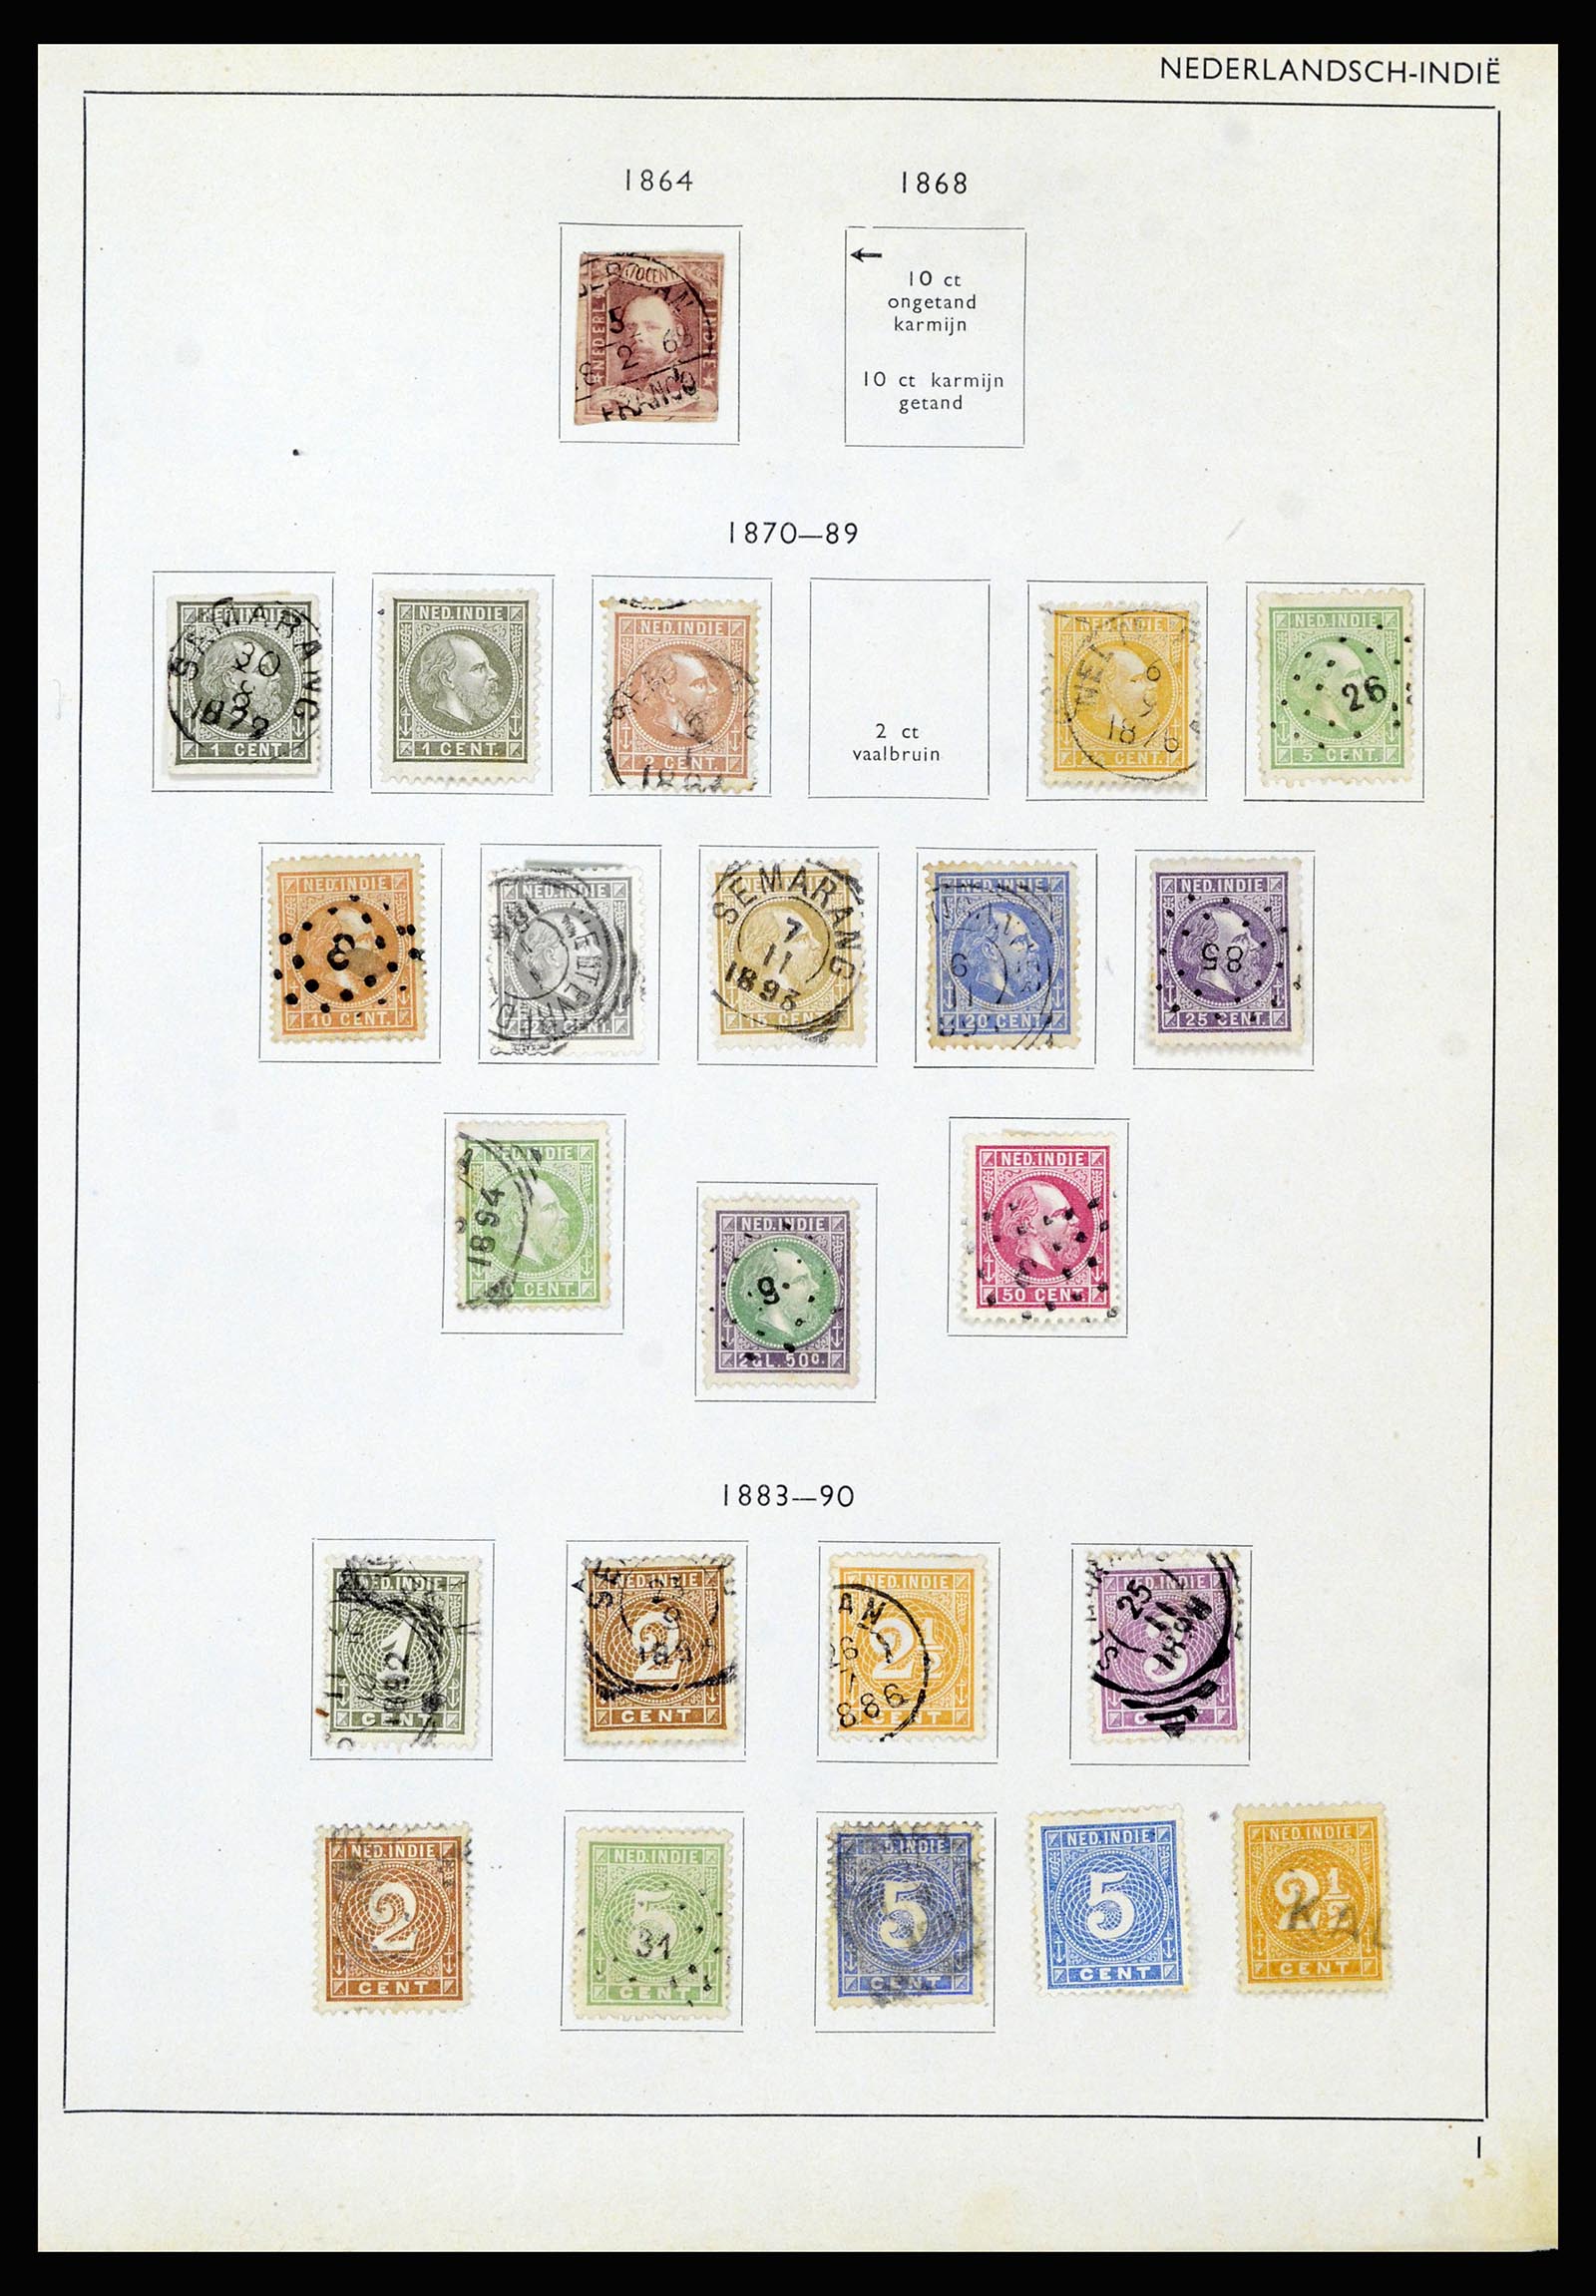 37217 001 - Stamp collection 37217 Dutch territories 1864-1975.